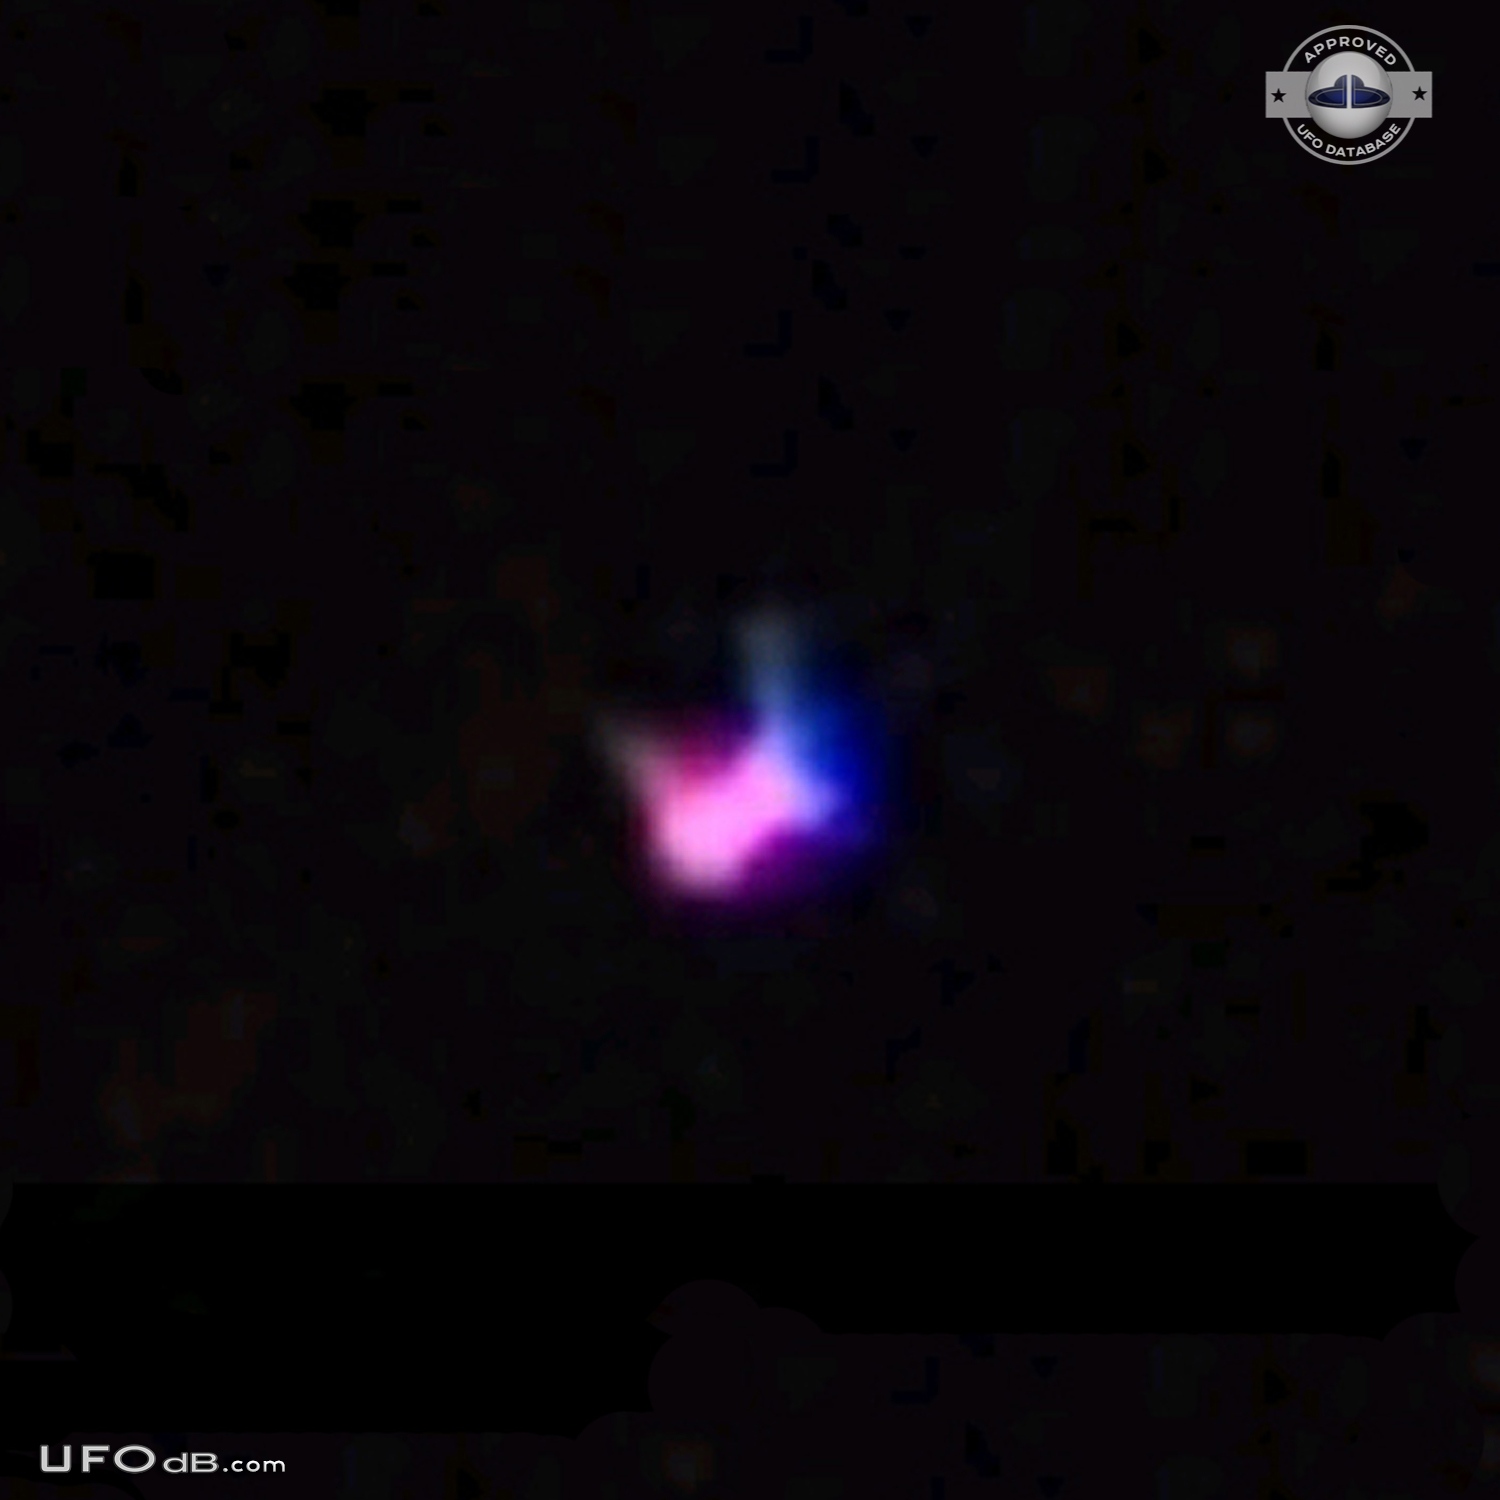 UFOs twinkling of many colors makes the News in Hecker Illinois 2012 UFO Picture #512-1